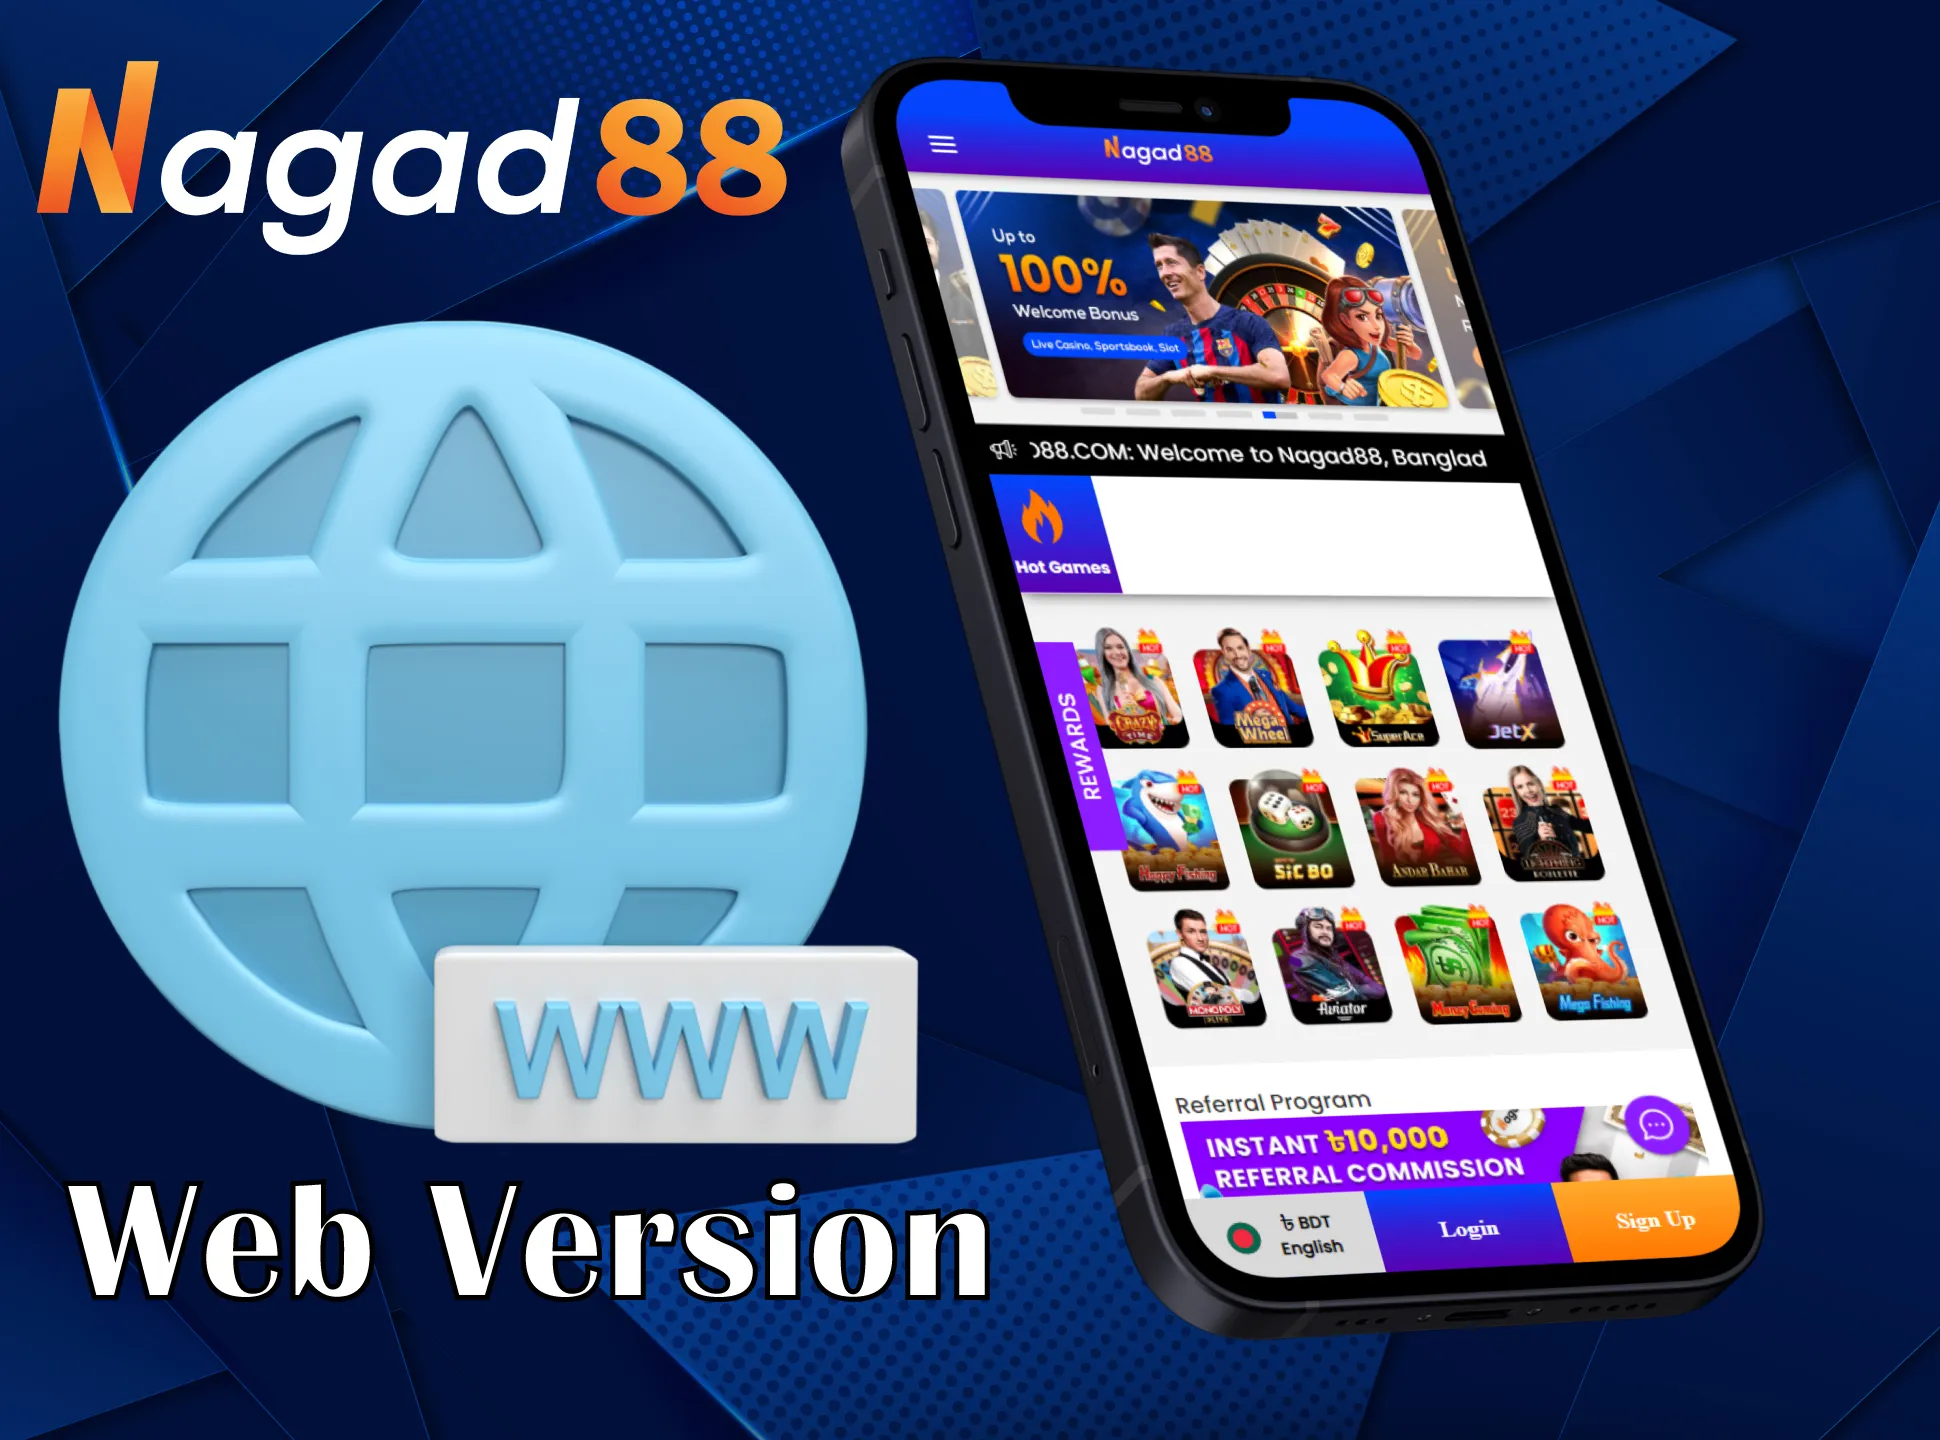 You can open a web version of Nagad88 on your mobile phone and bet via it.